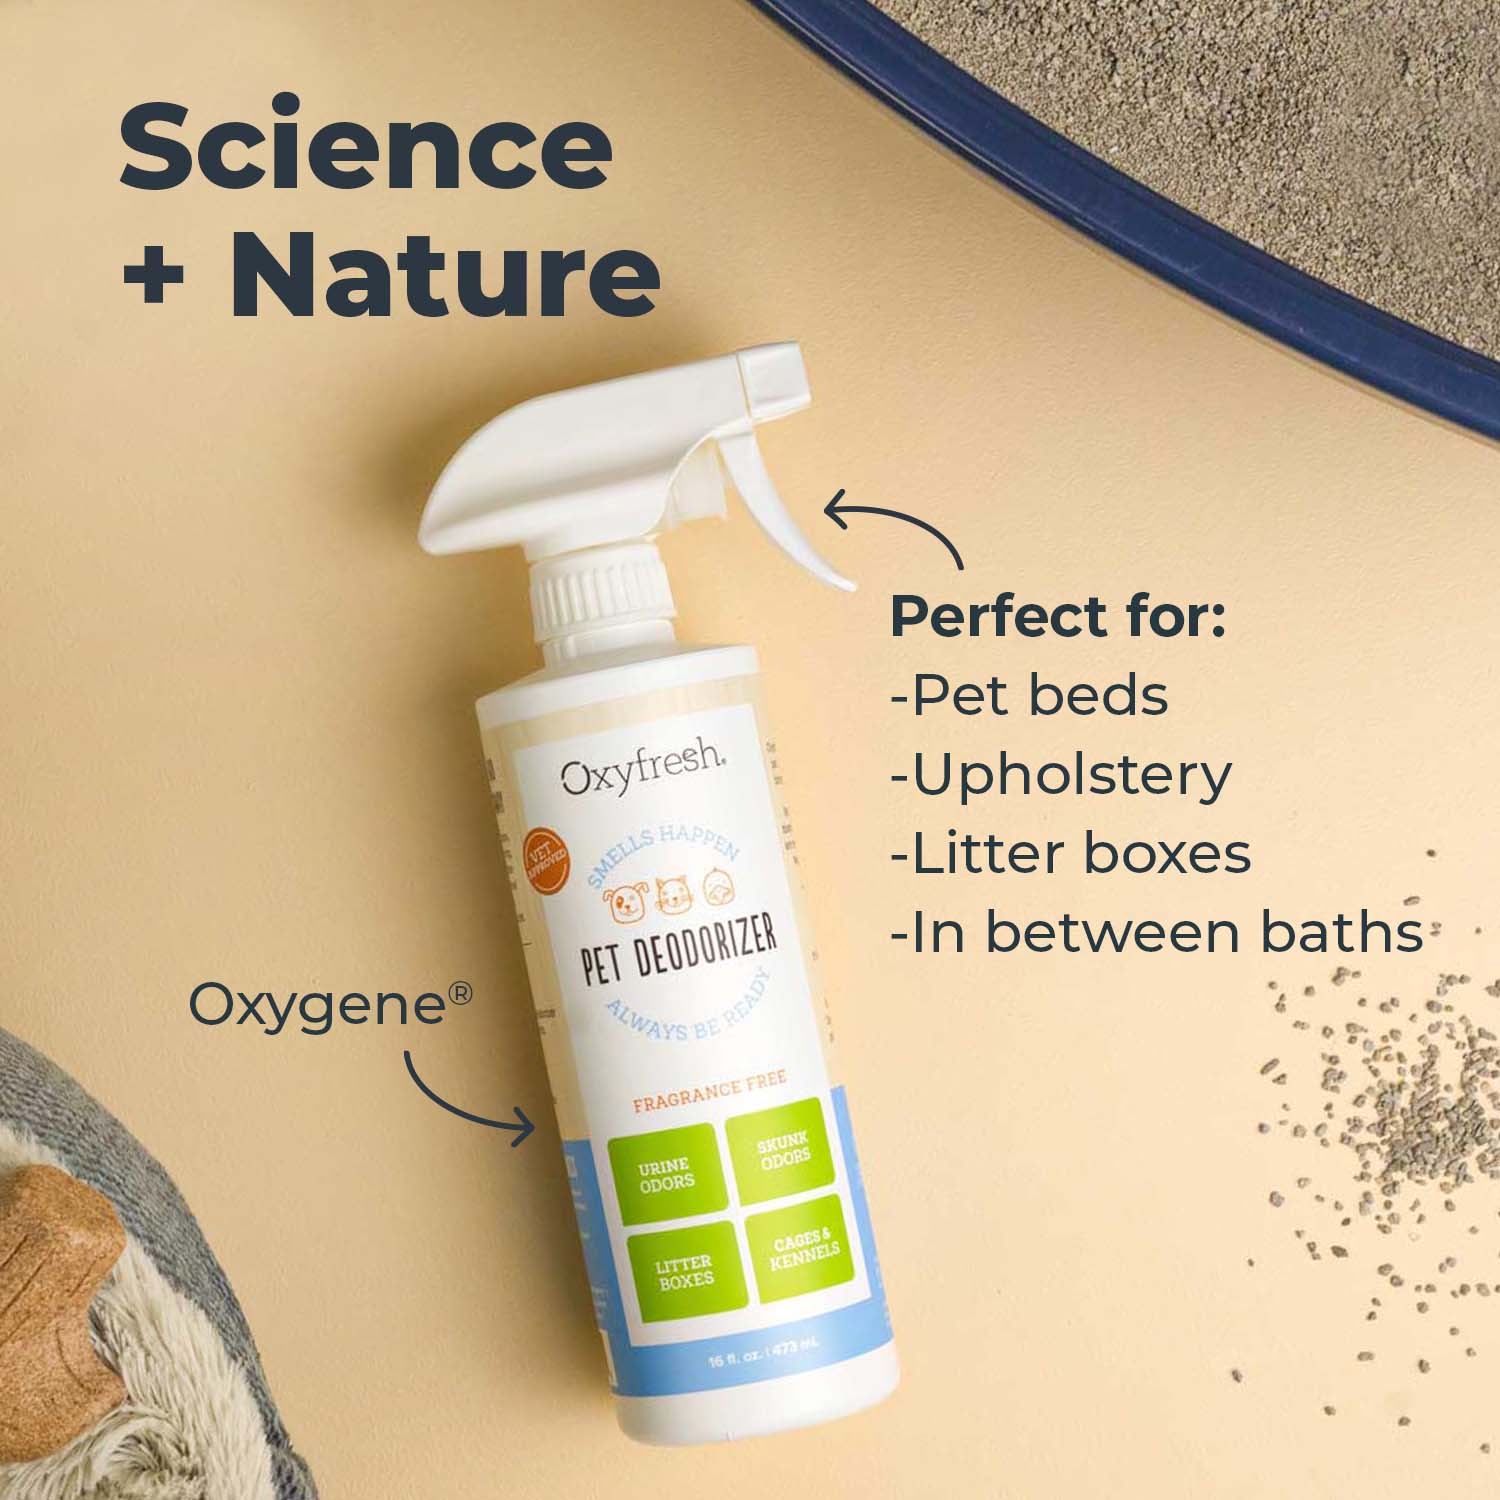 oxyfresh-pet-deodorizer-spray-is-perfect-for-pet-beds-upholstery-litter-boxes-and-in-between–baths